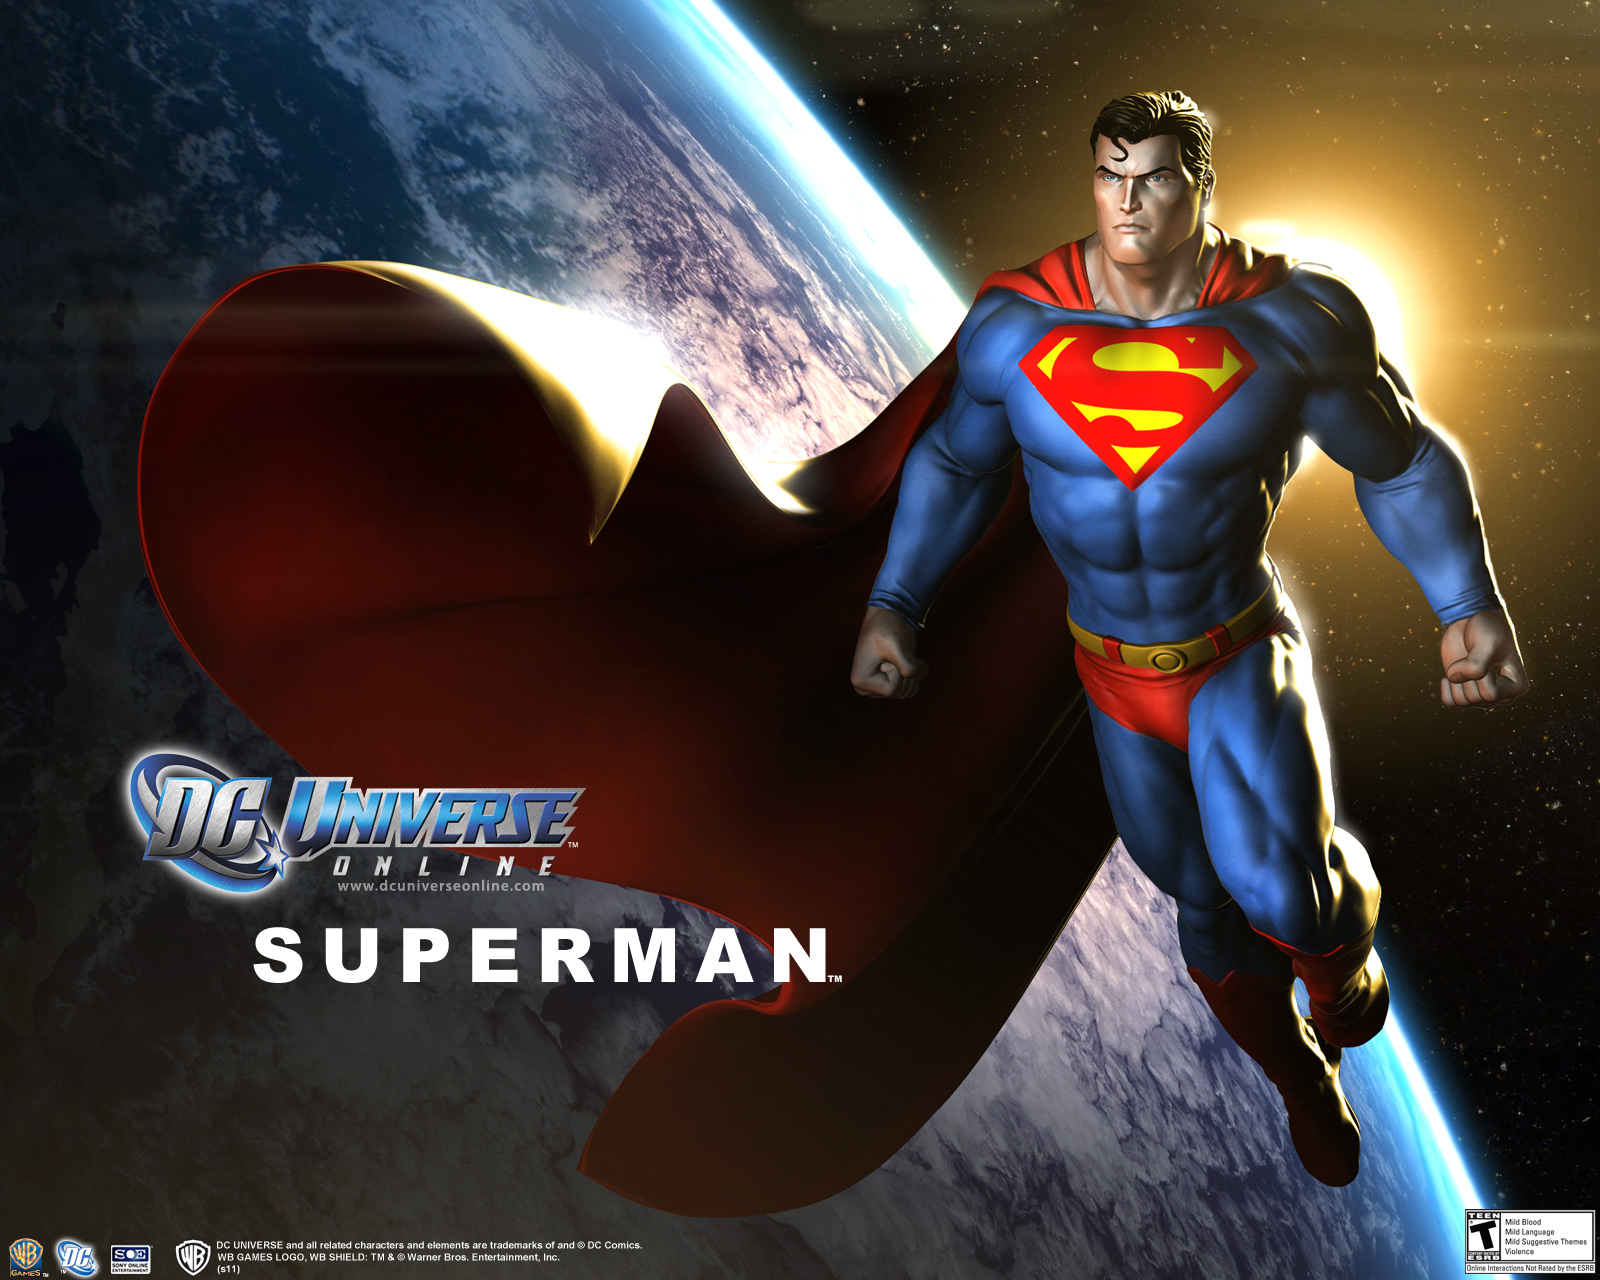 What happened to Superman in DC Universe Online?